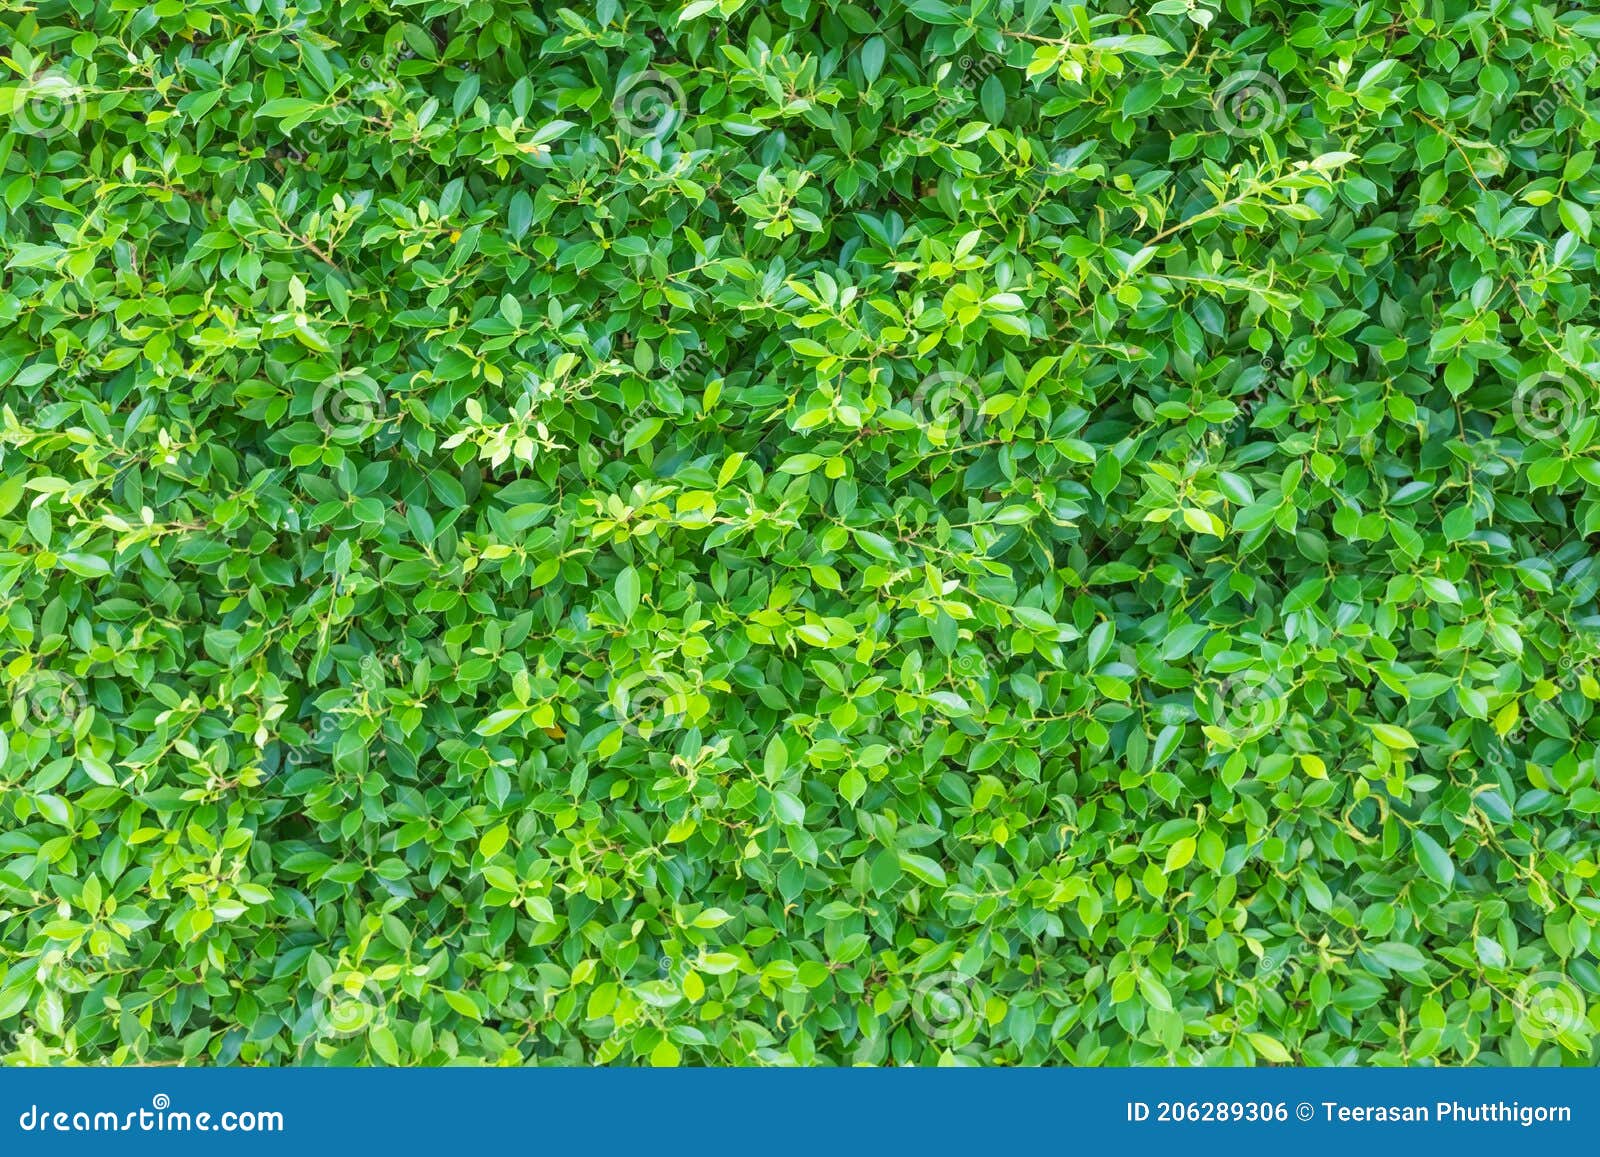 High Resolution of Small Natural Green Leaves Wall Inside Garden  Decoration. Ideal for Background or Wallpaper with Empty Area for Stock  Photo - Image of abstract, copy: 206289306